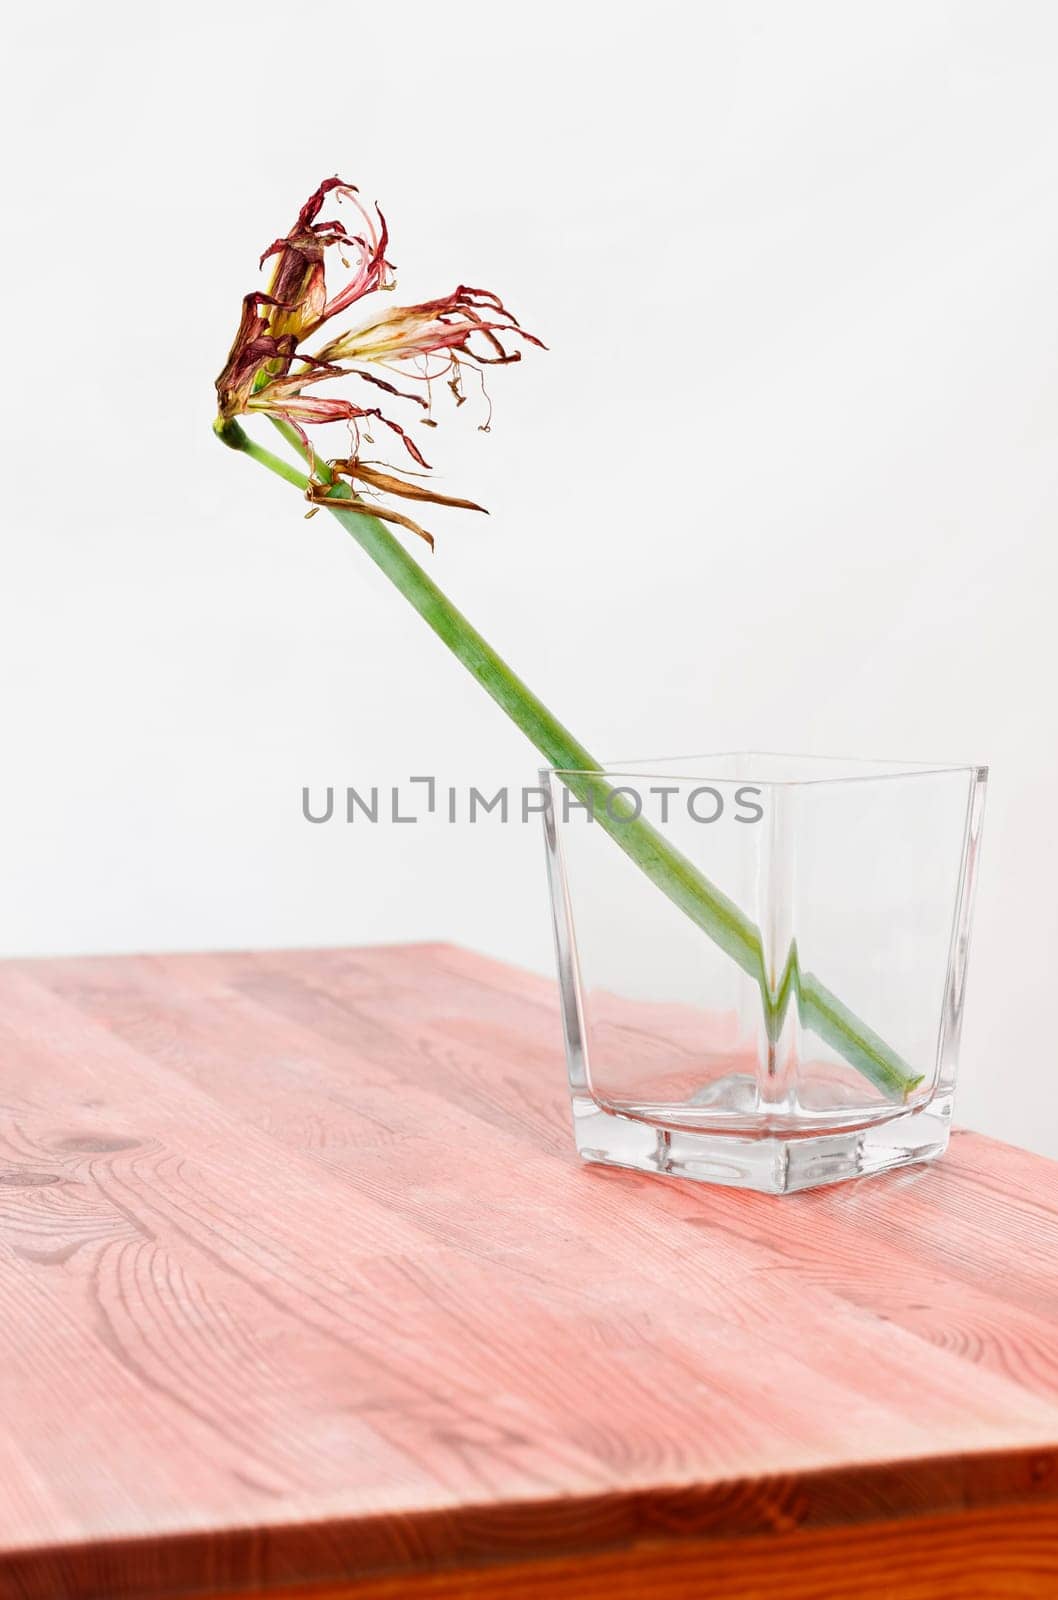 Dried flower of amaryllis in vase , memories and romantic activity